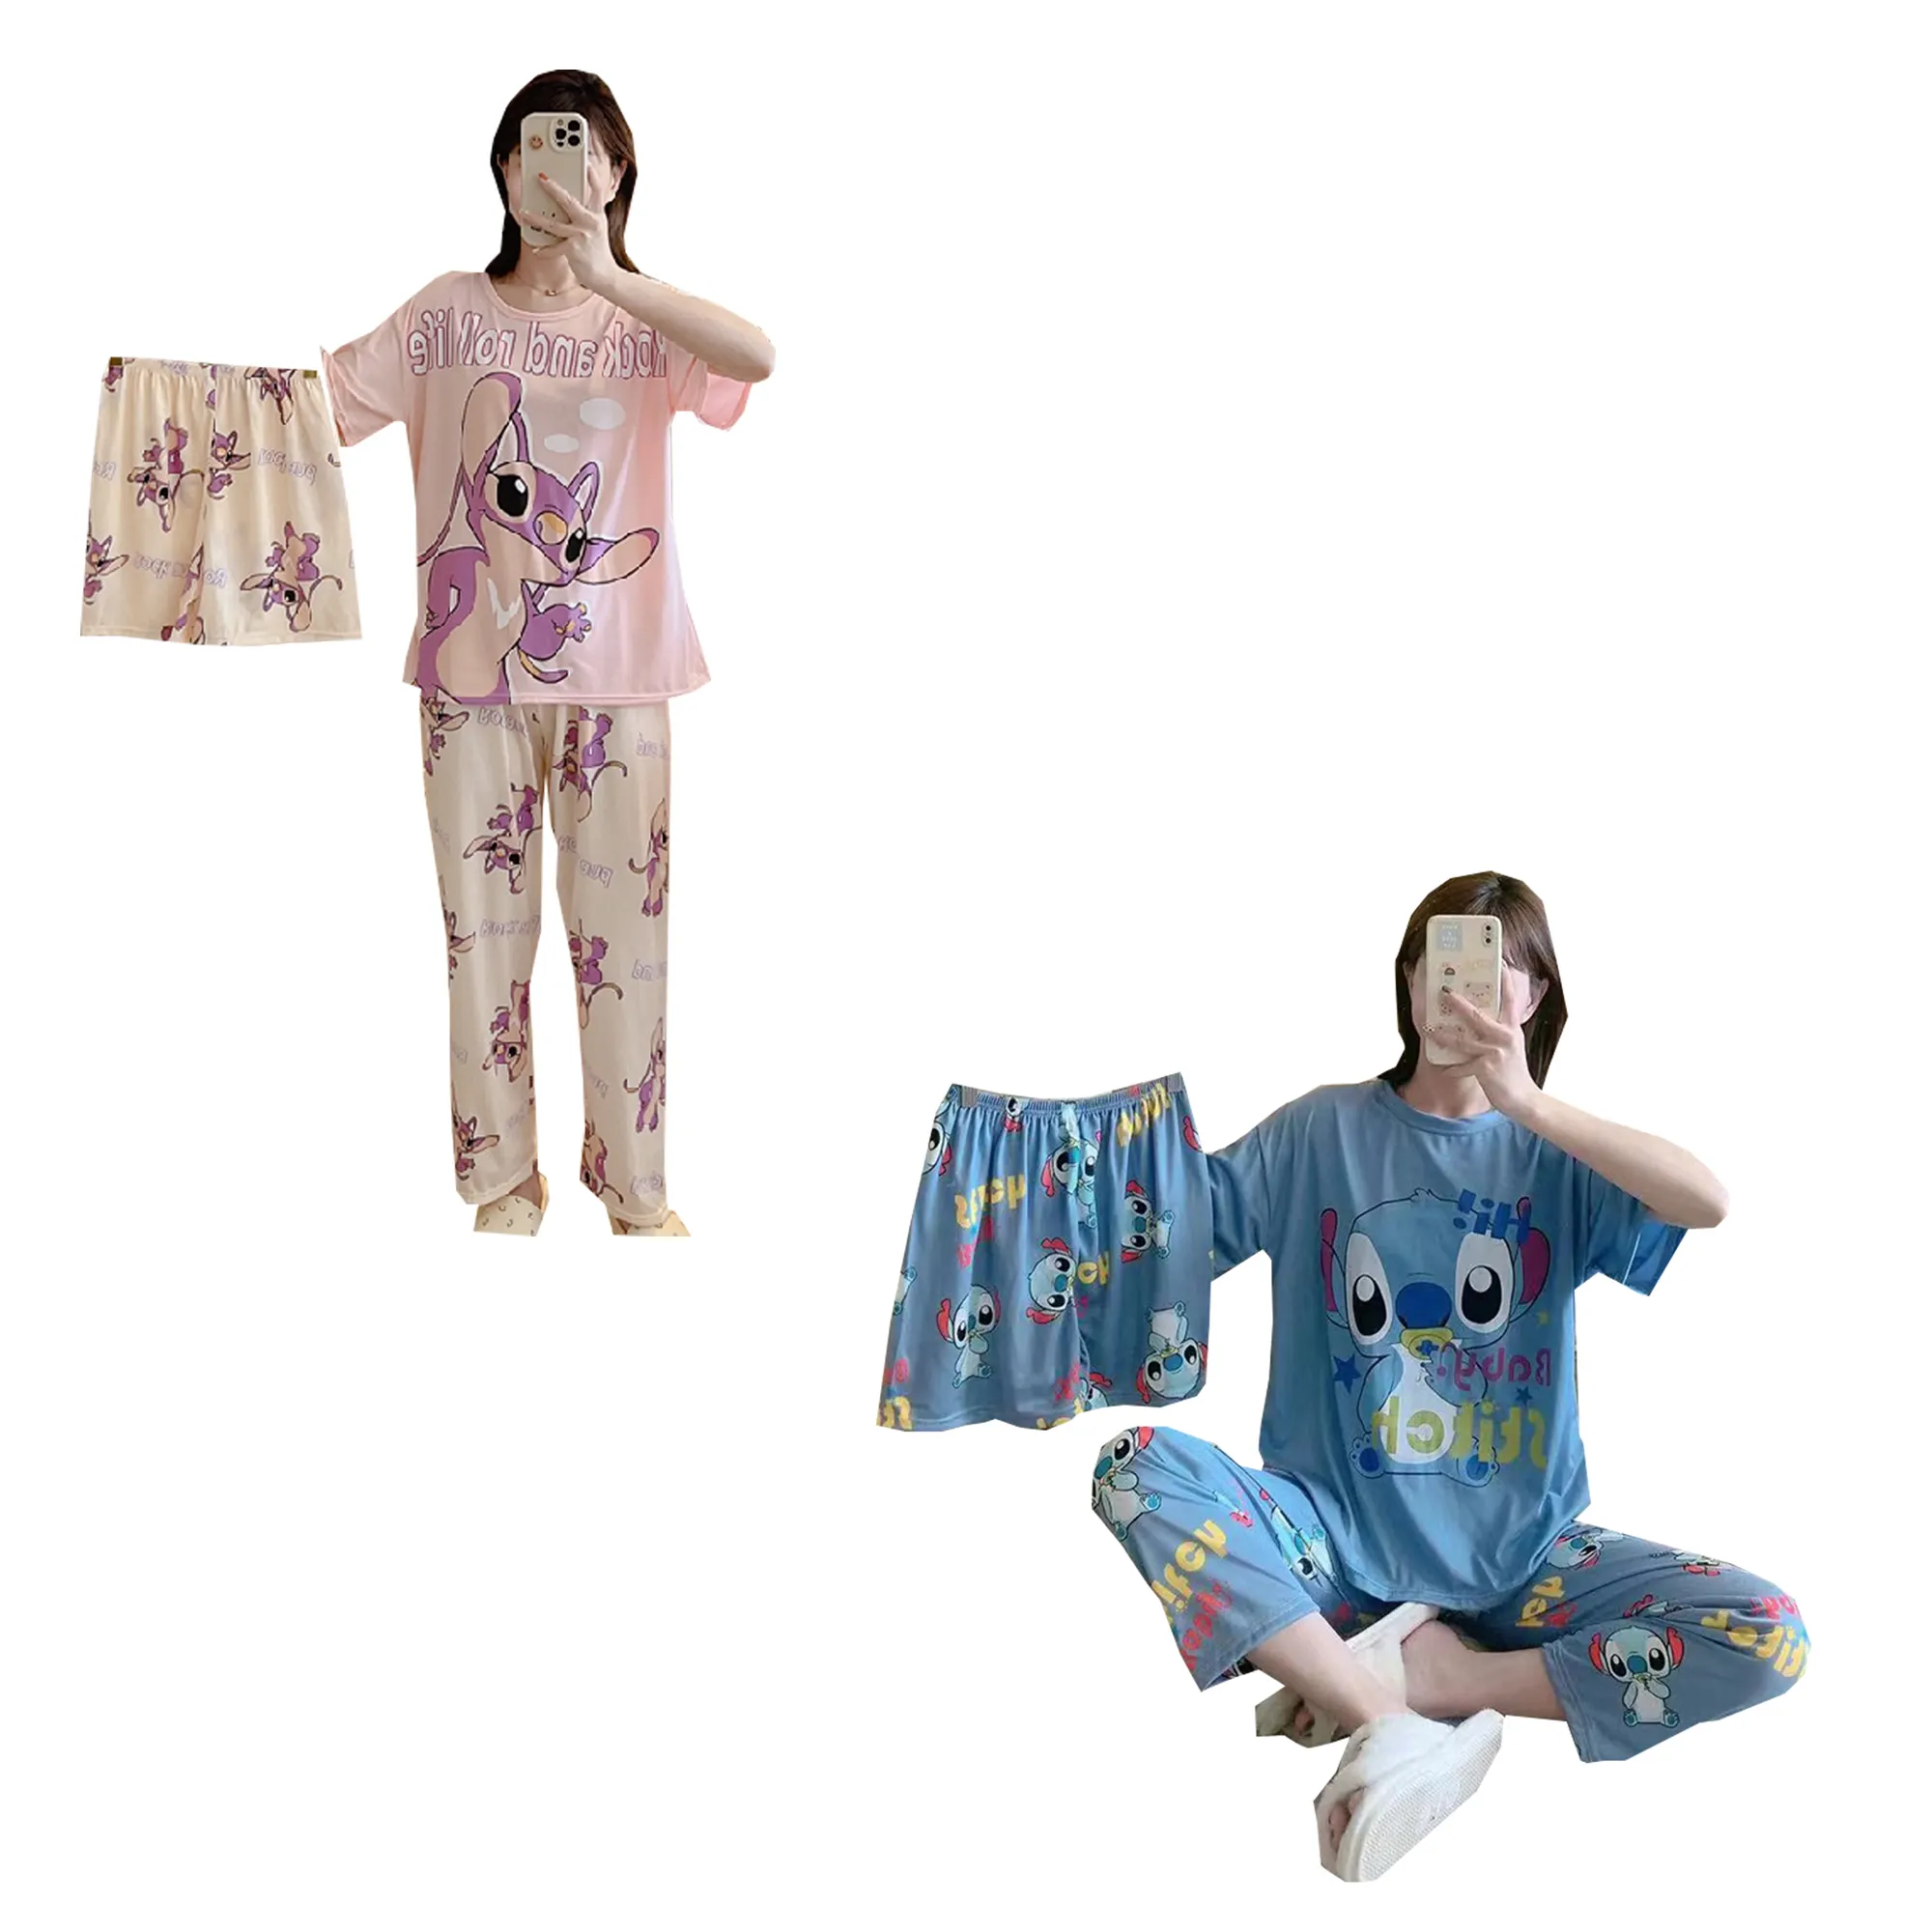 Cool summer cartoon Stitch breathable t-shirt wear women sexy women's clothes nighties pajamas